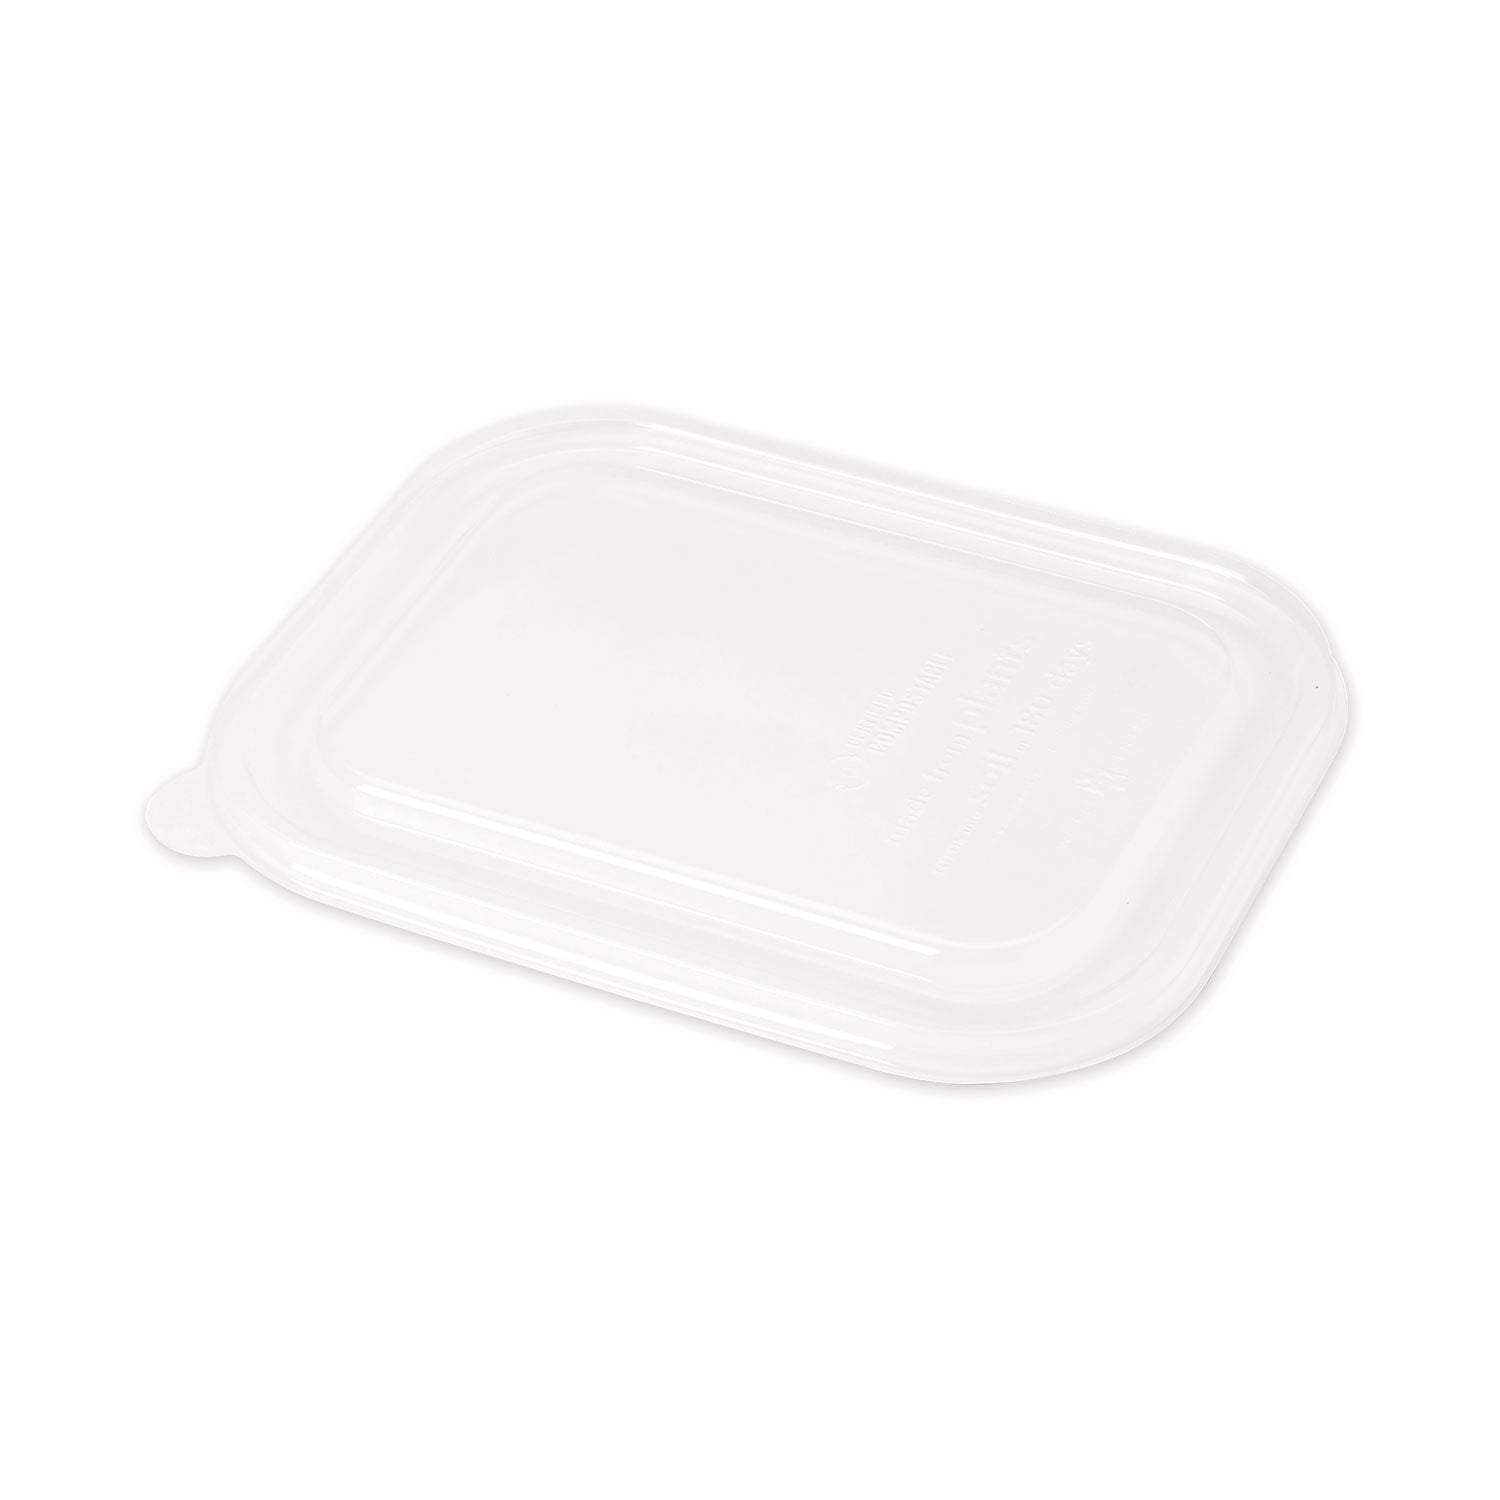 pla-lids-for-fiber-containers-88-x-69-x-08-clear-plastic-400-carton_worctlcs3 - 1